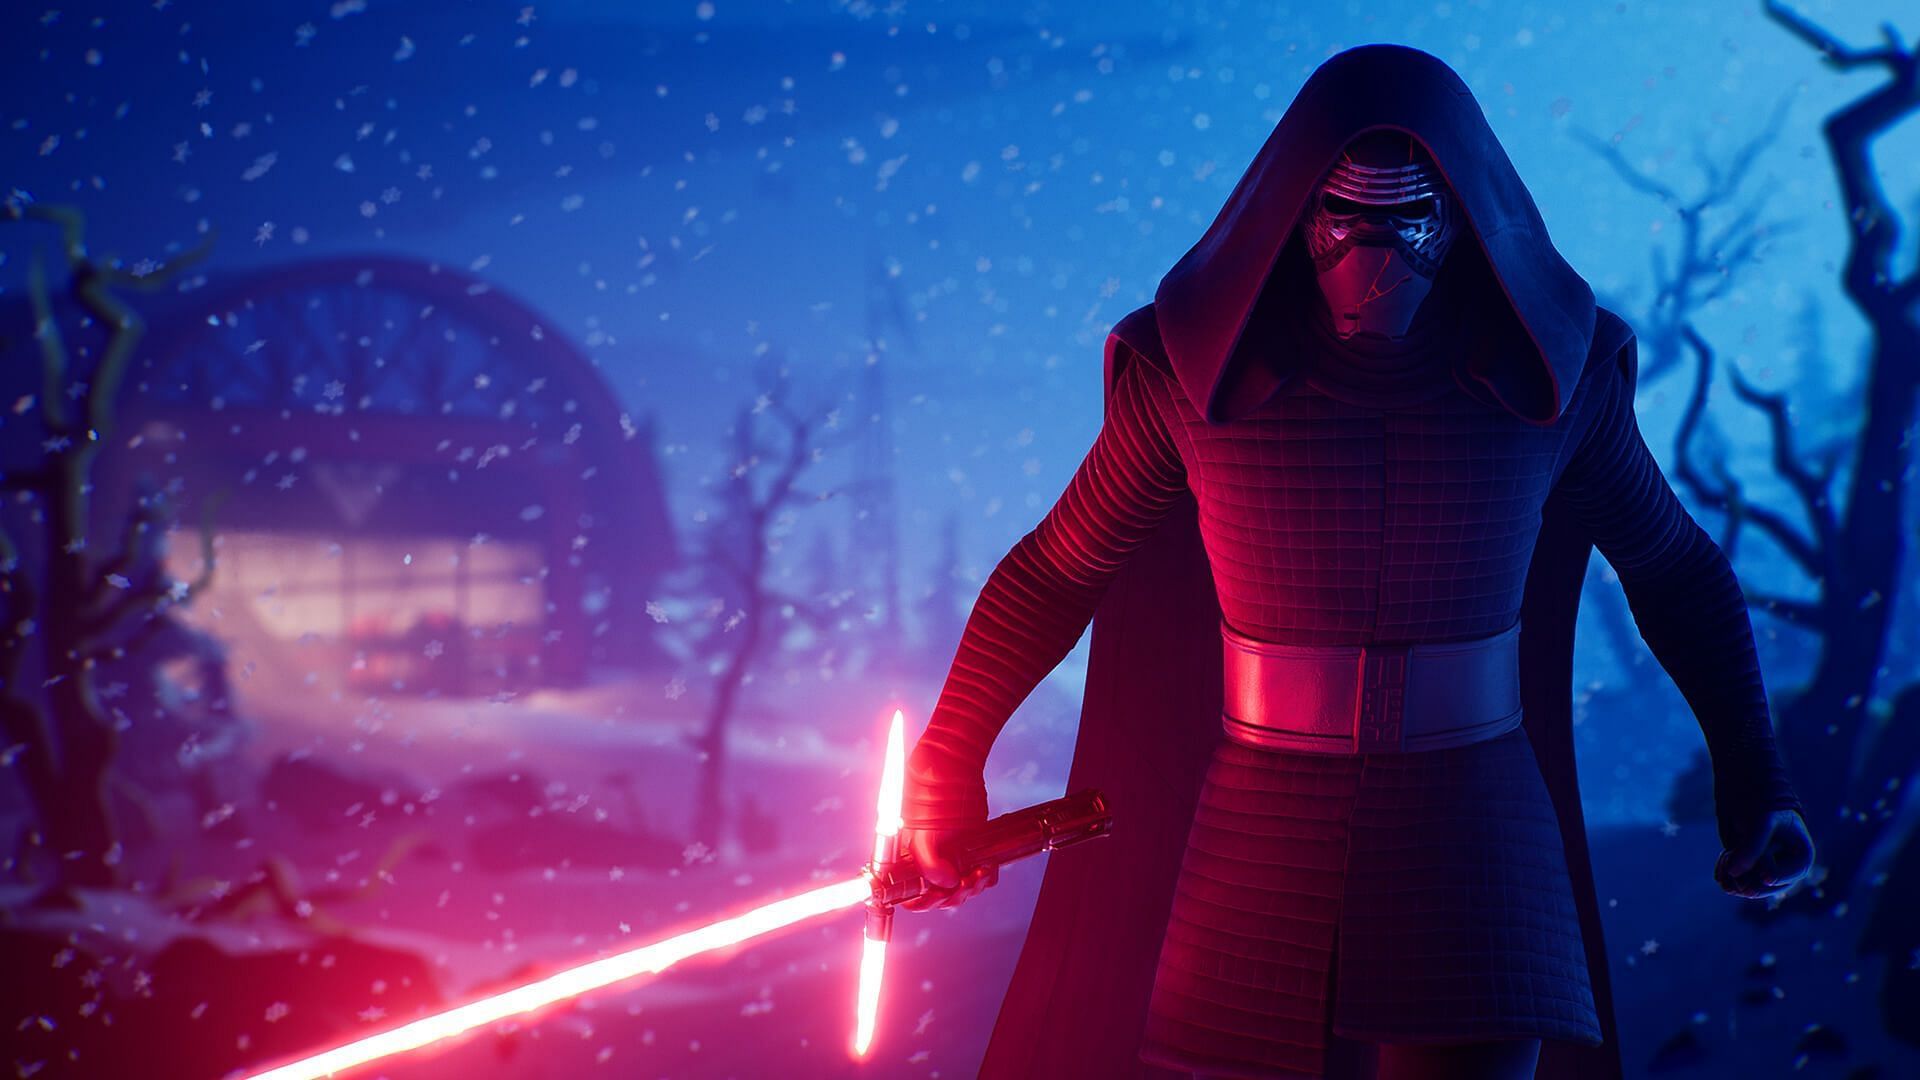 New leaks suggest Anakin Skywalker might be coming to Fortnite in Chapter 3 Season 3, which might be a Star Wars-themed season (Image via Epic Games)